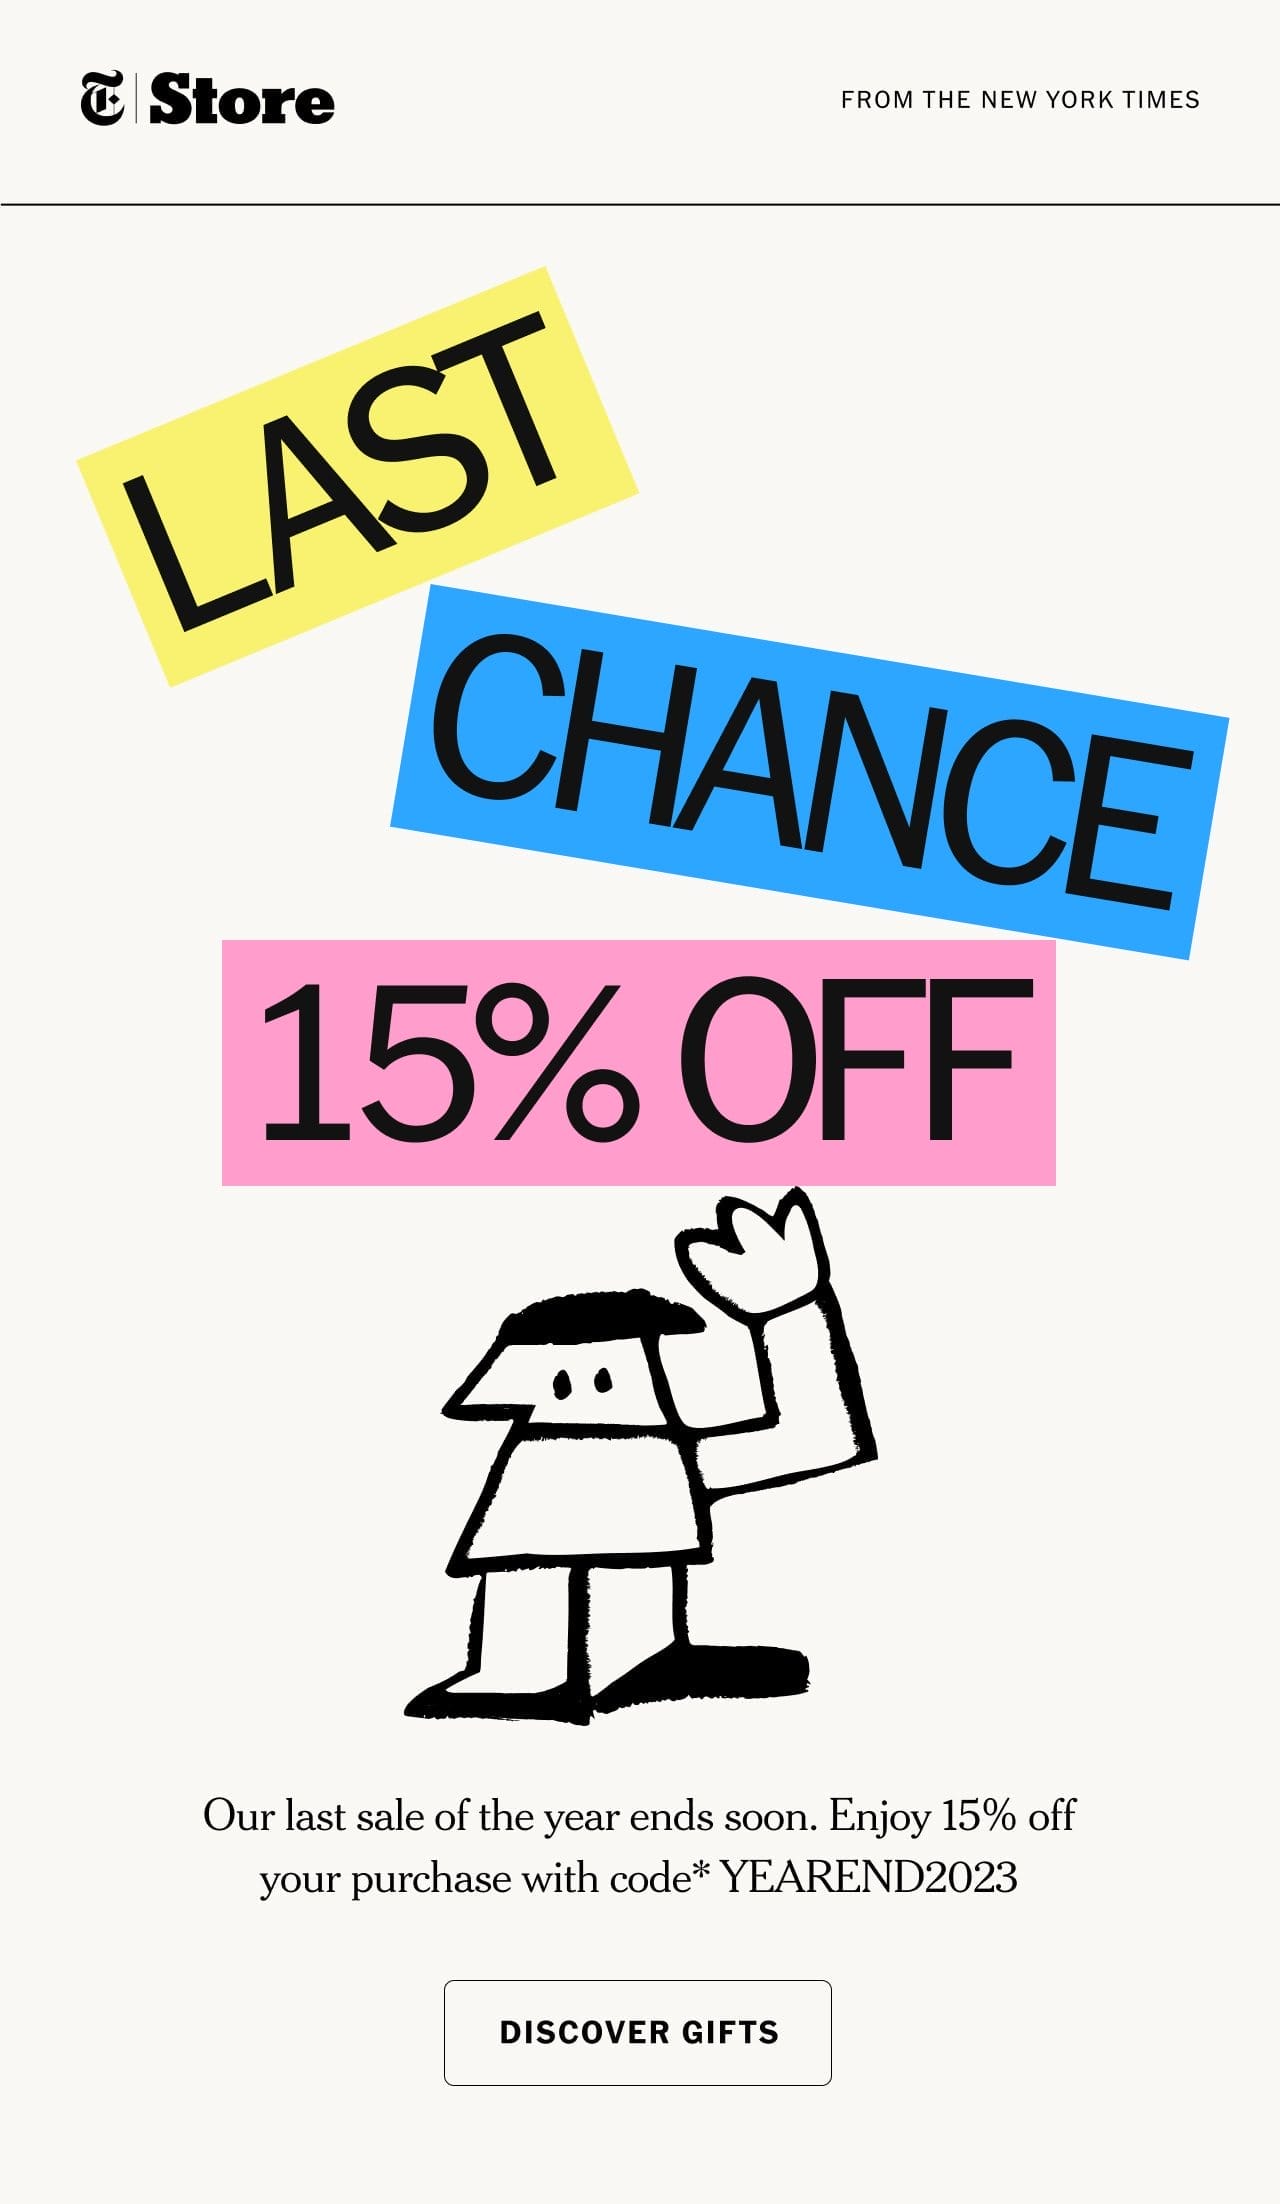 Our last sale of the year ends soon. Enjoy 15% off your purchase with code* YEAREND2023